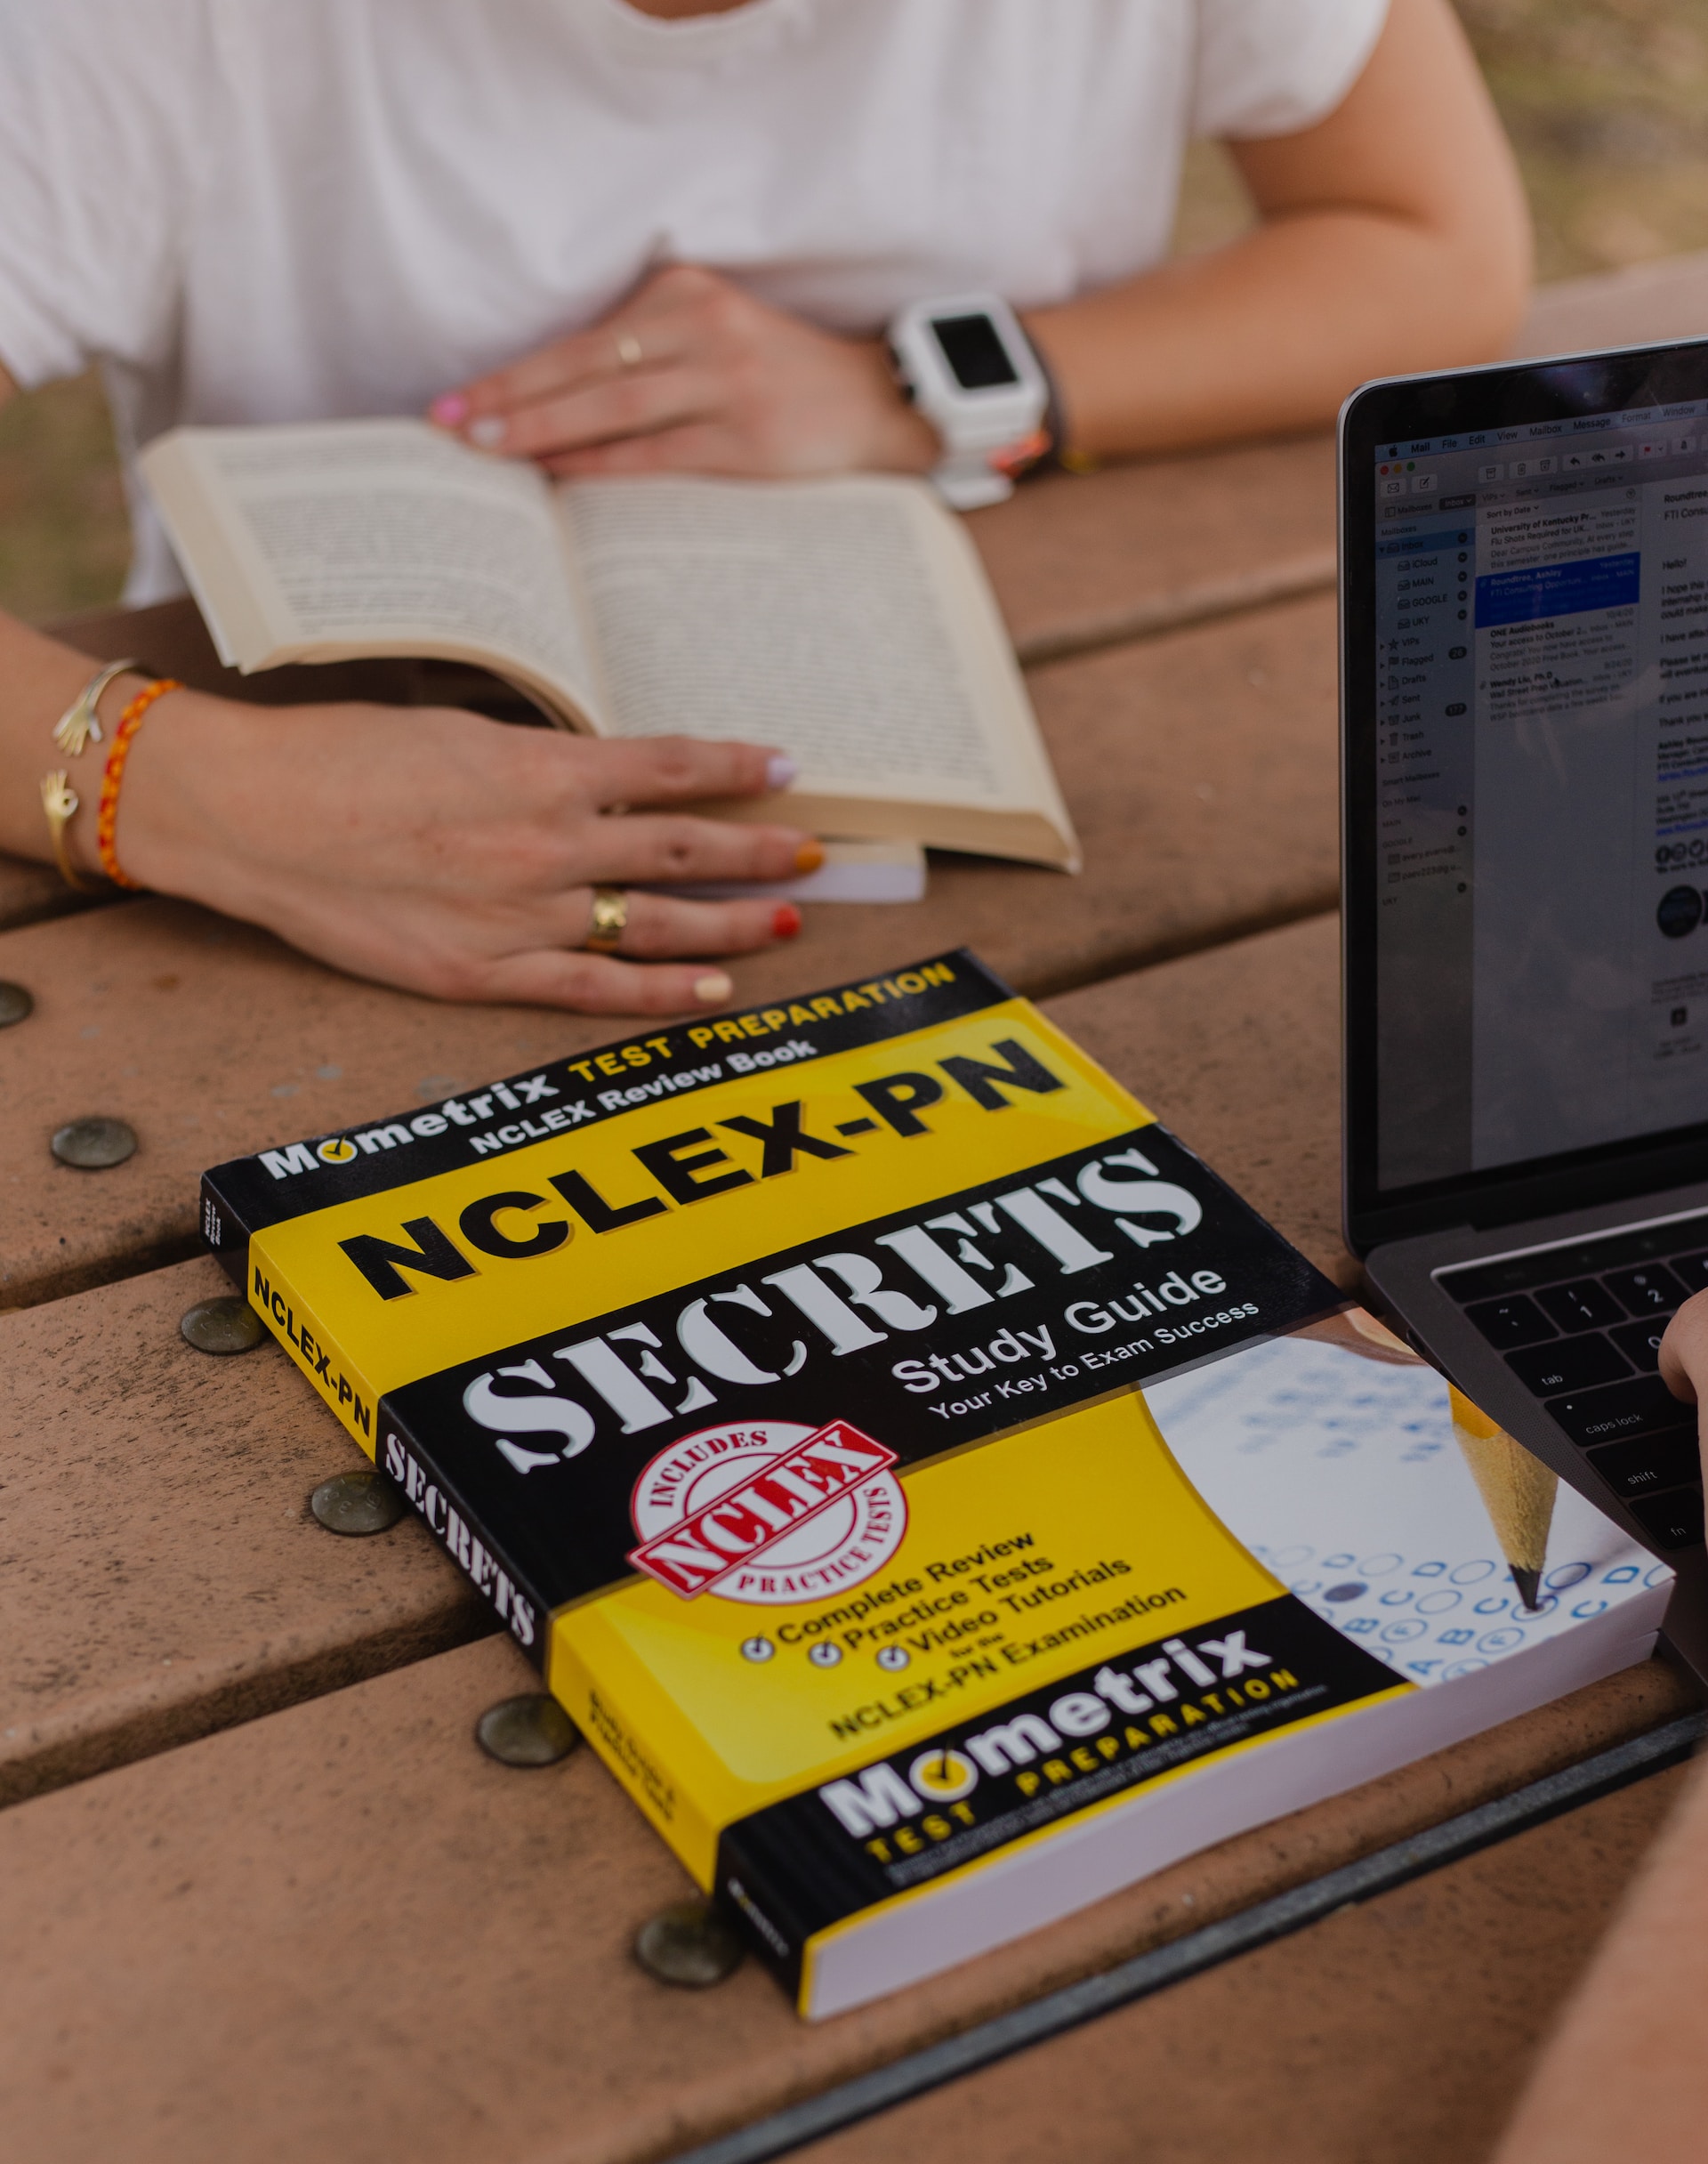 the image shows a book NCLEX-PN "Secrets Study Guide" and a female reading another book on the background 